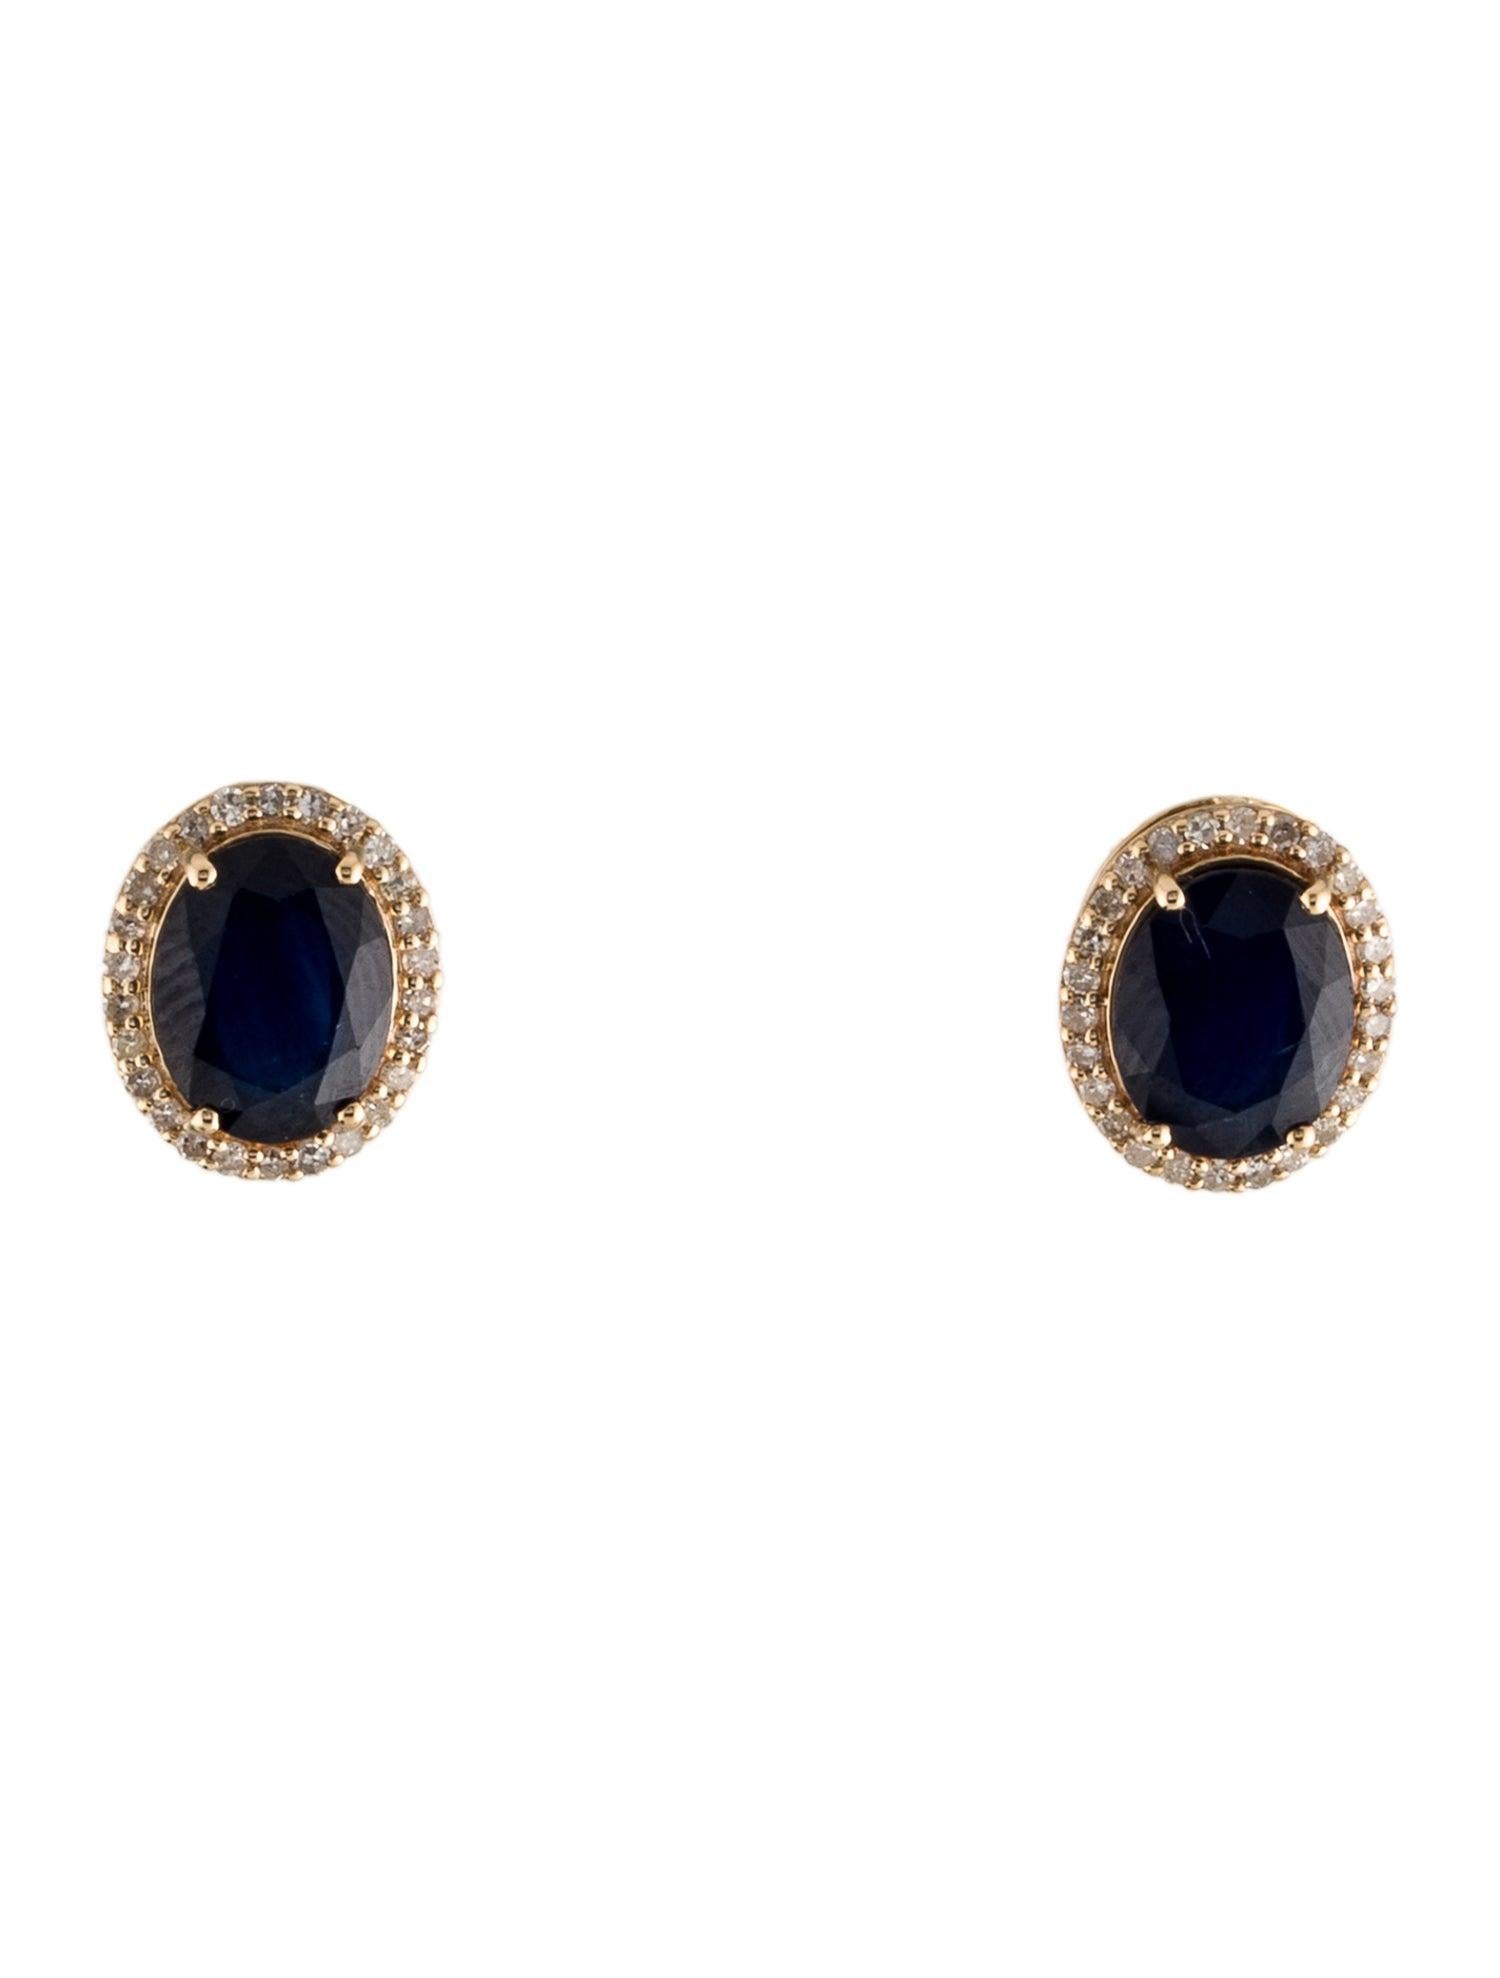 14K Sapphire & Diamond Stud Earrings - Elegant Gemstone Jewelry Timeless Sparkle In New Condition For Sale In Holtsville, NY